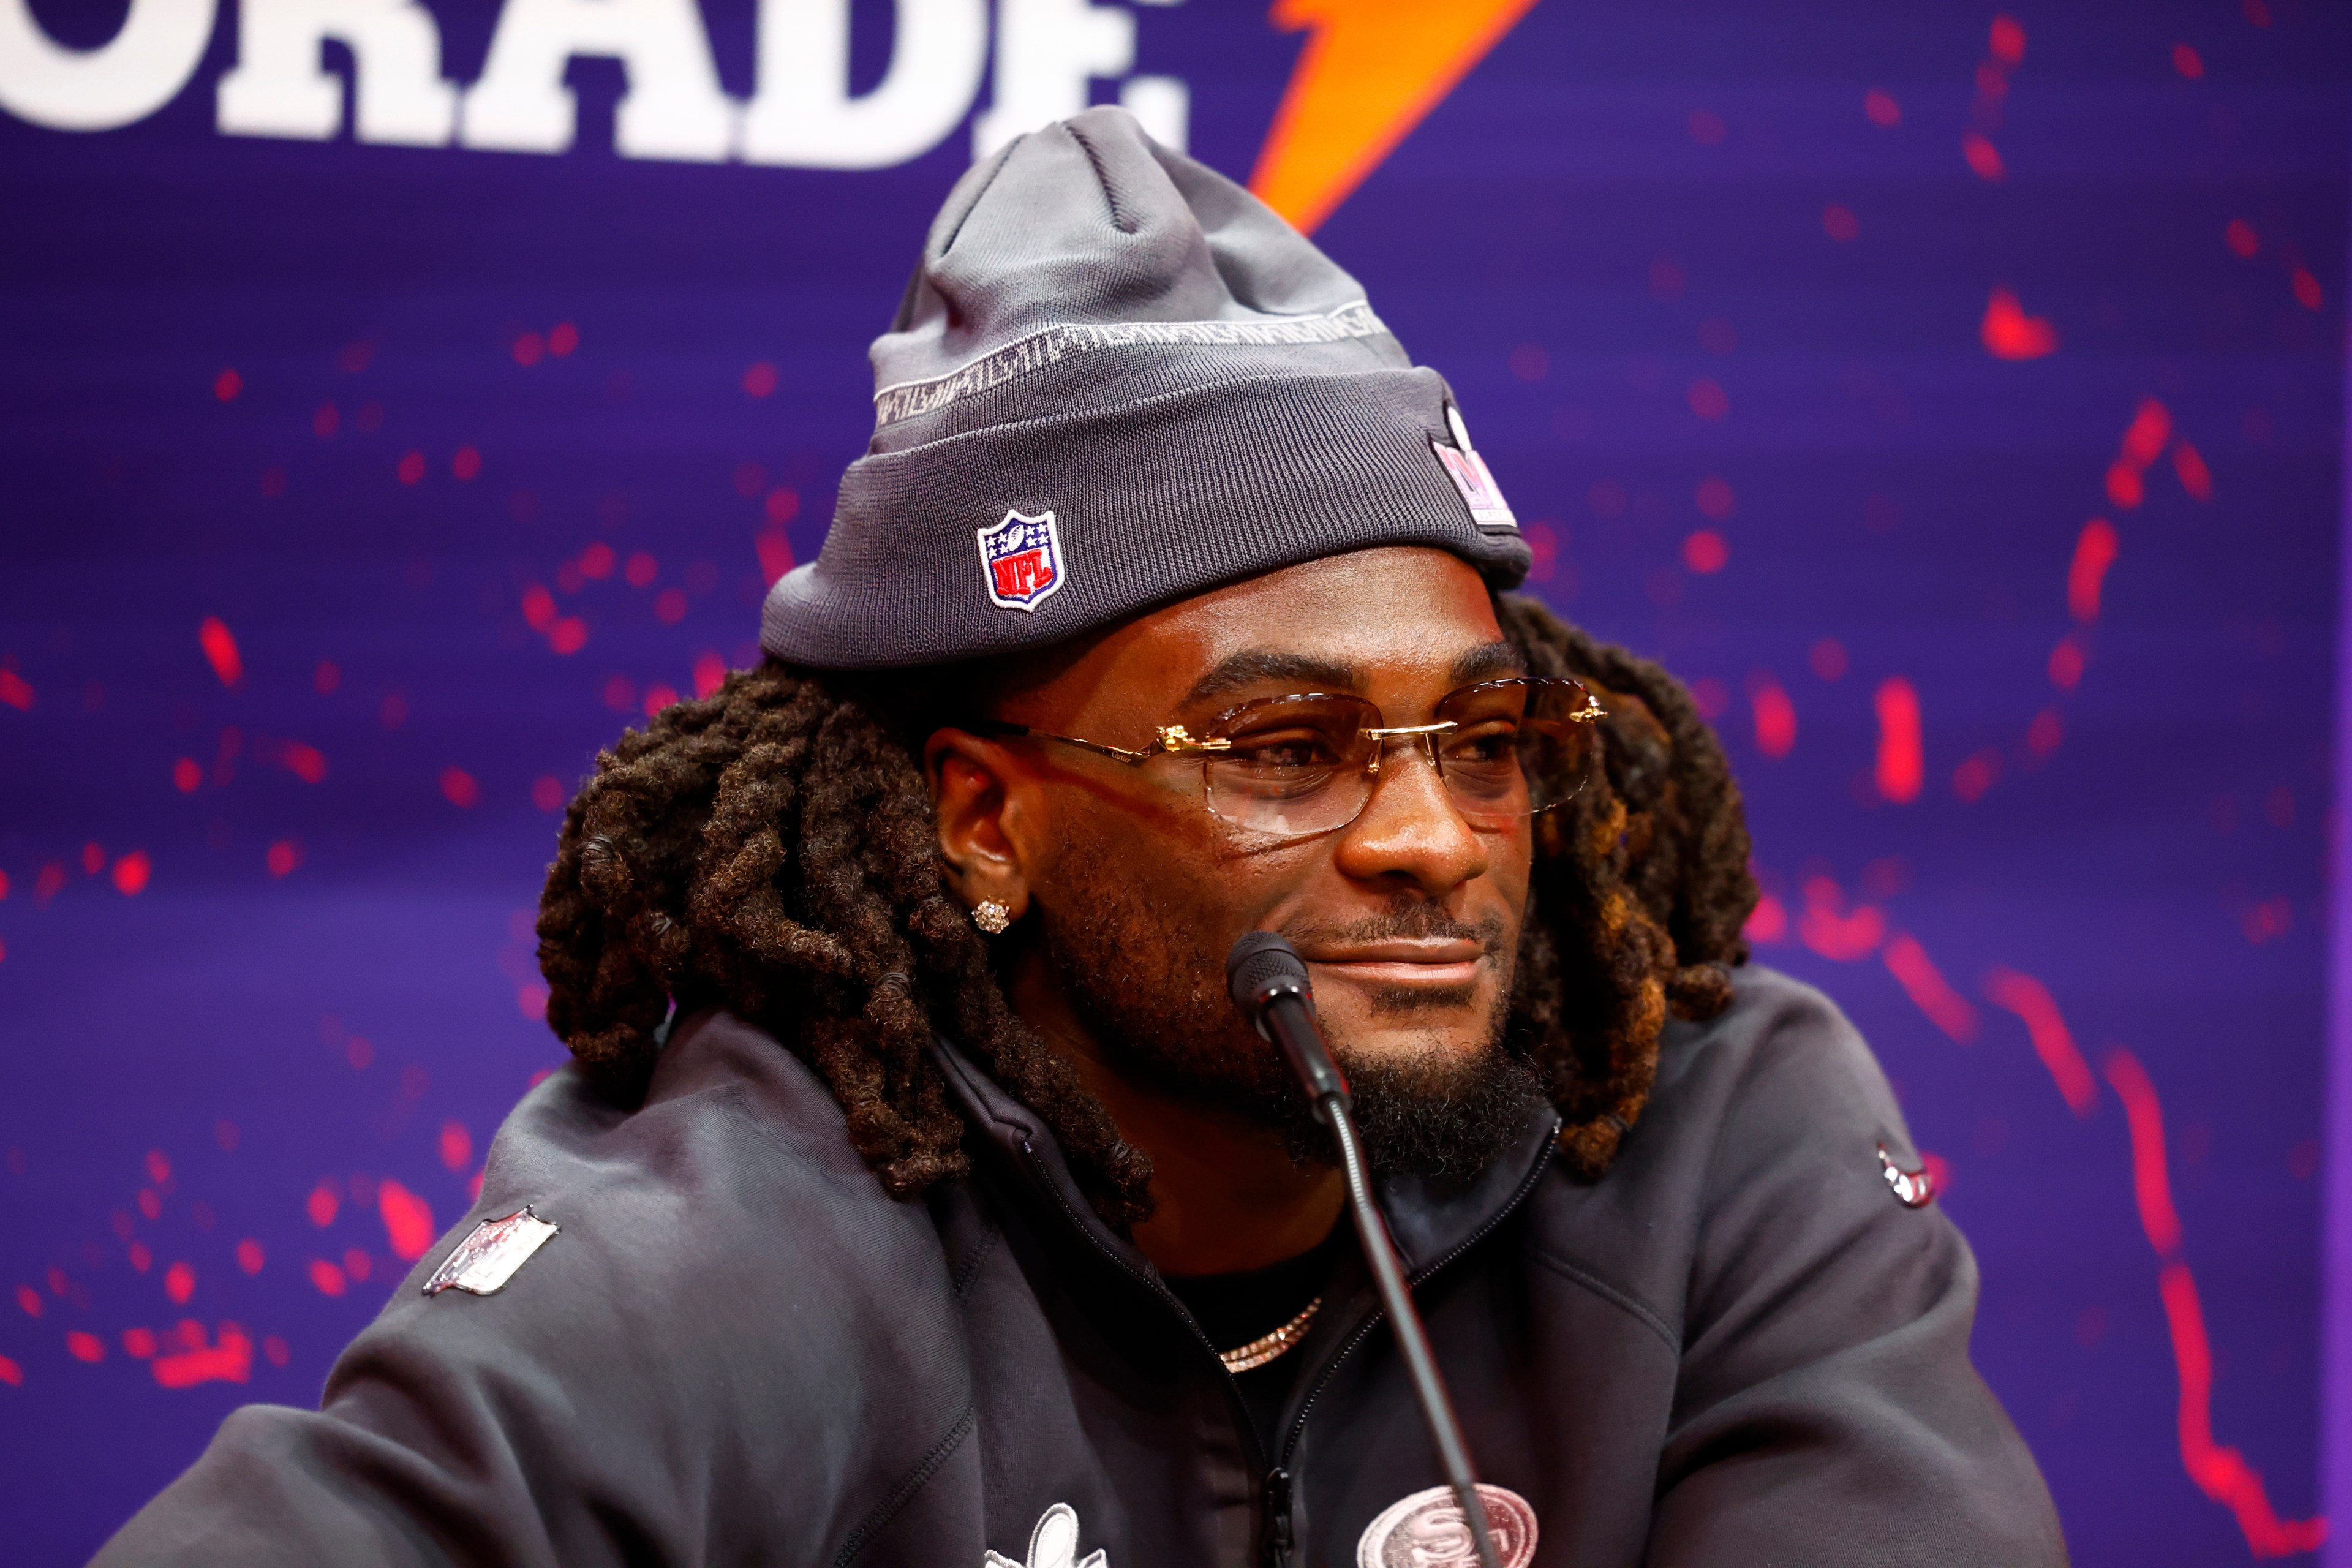 A person with dreadlocks and glasses sits smiling, wearing a beanie and sports jacket with an NFL logo against a purple backdrop.